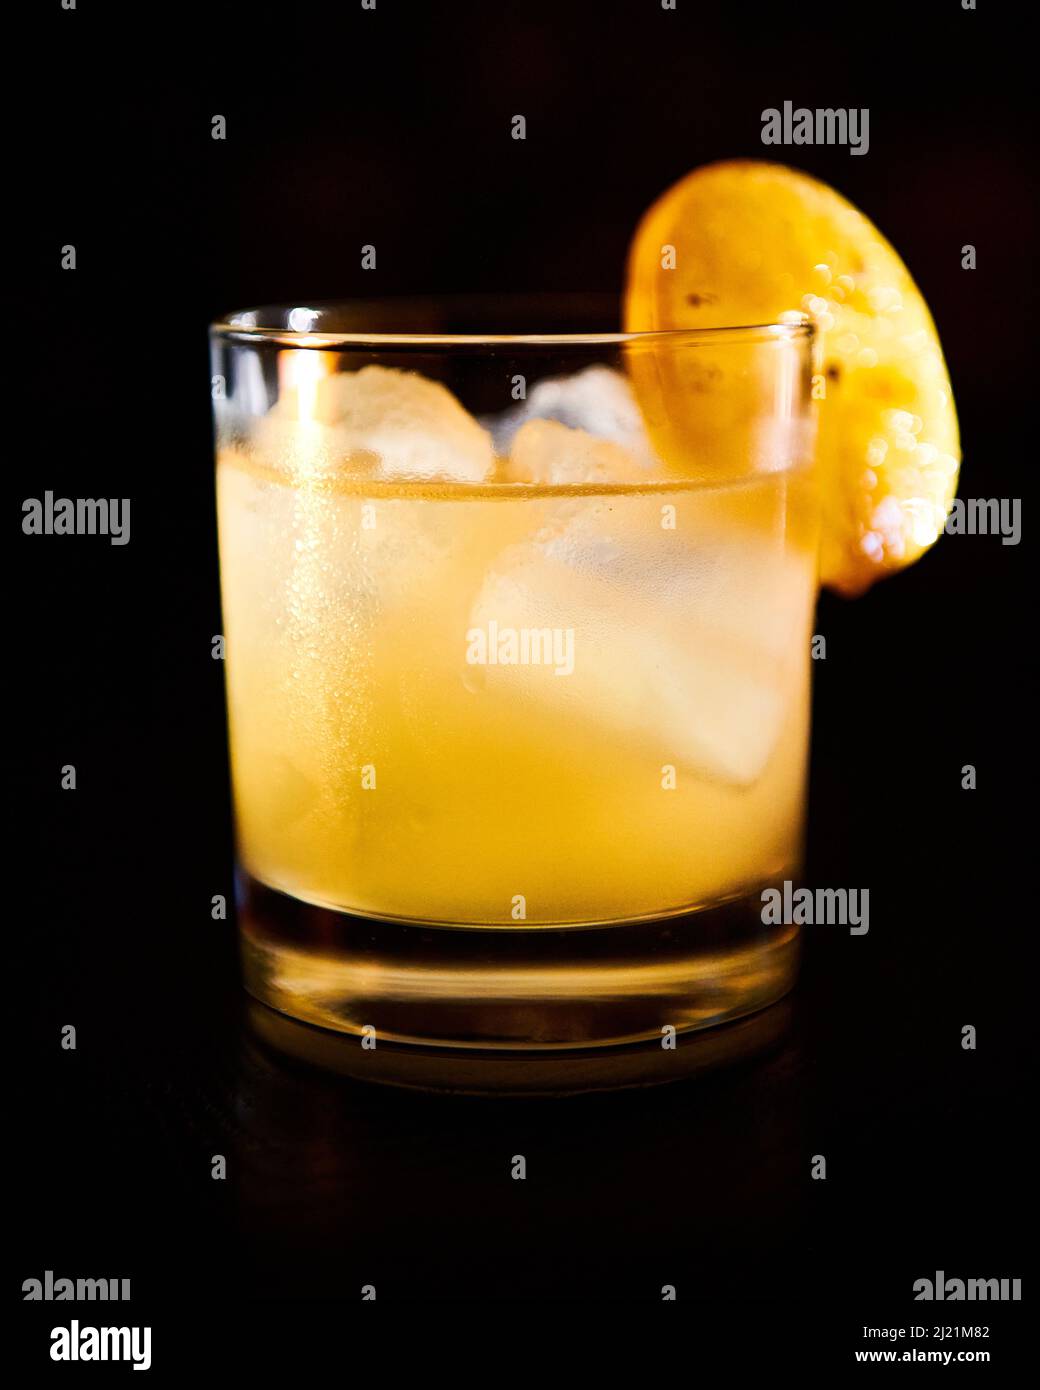 A custom cocktail between a penicillin and a rusty nail with notes of honey lemone and whisky. Yellow in colour with a slice of lemon. Stock Photo